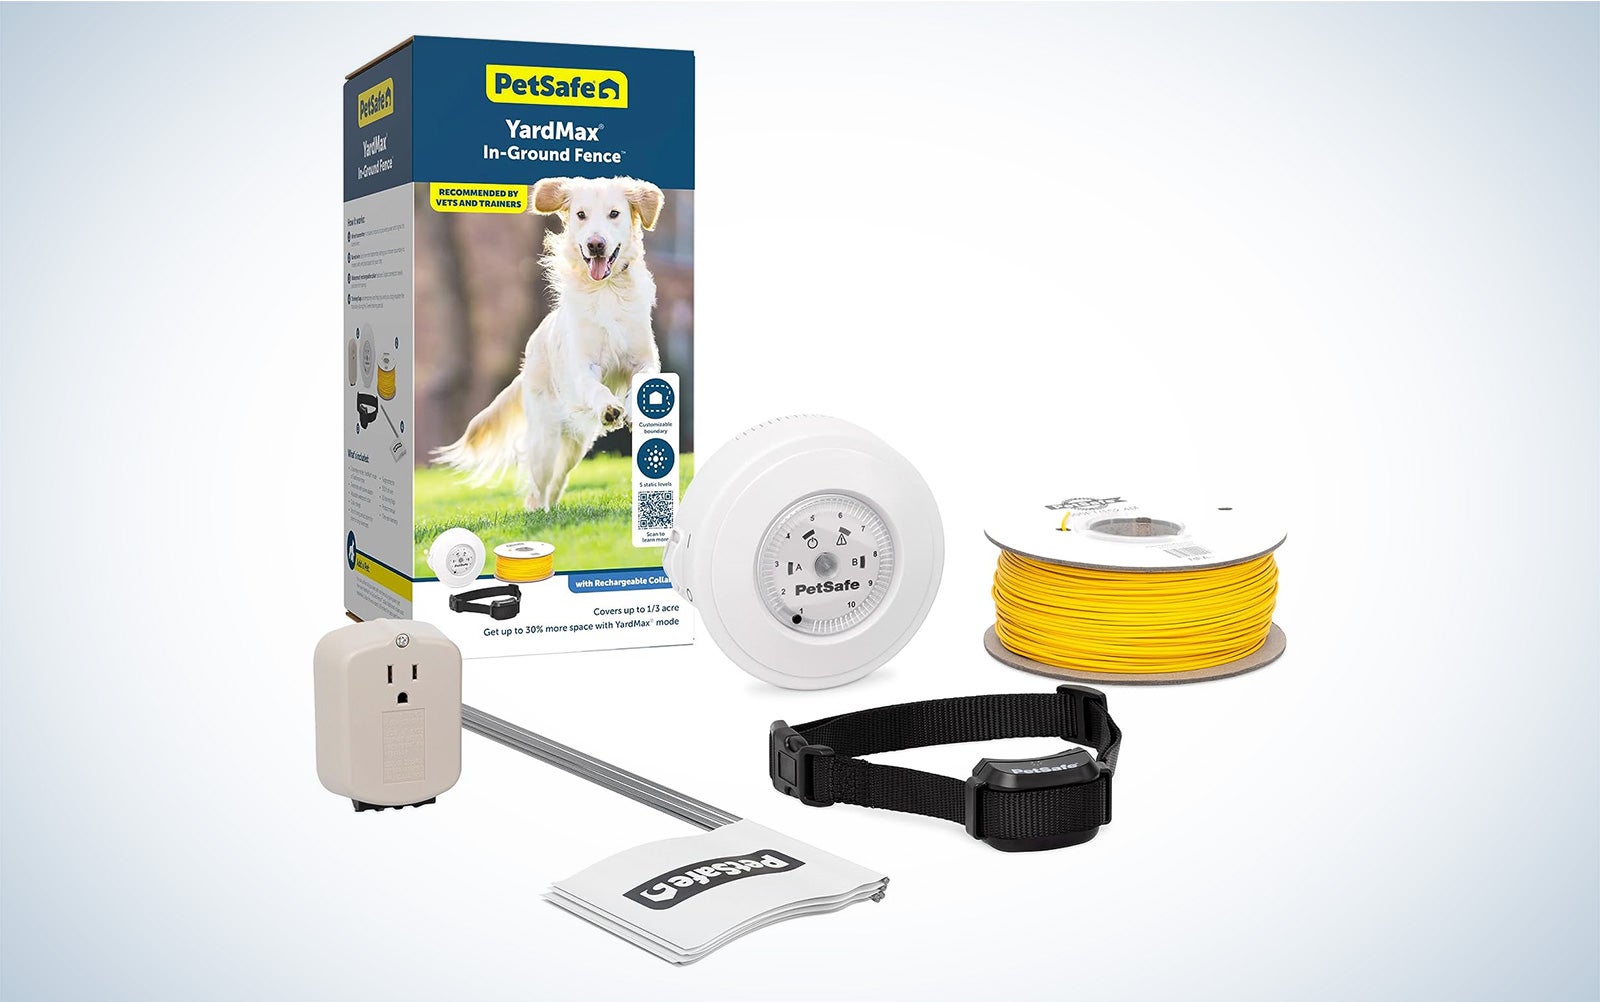 Pet Safe Yard Max rechargeable in-ground dog fence